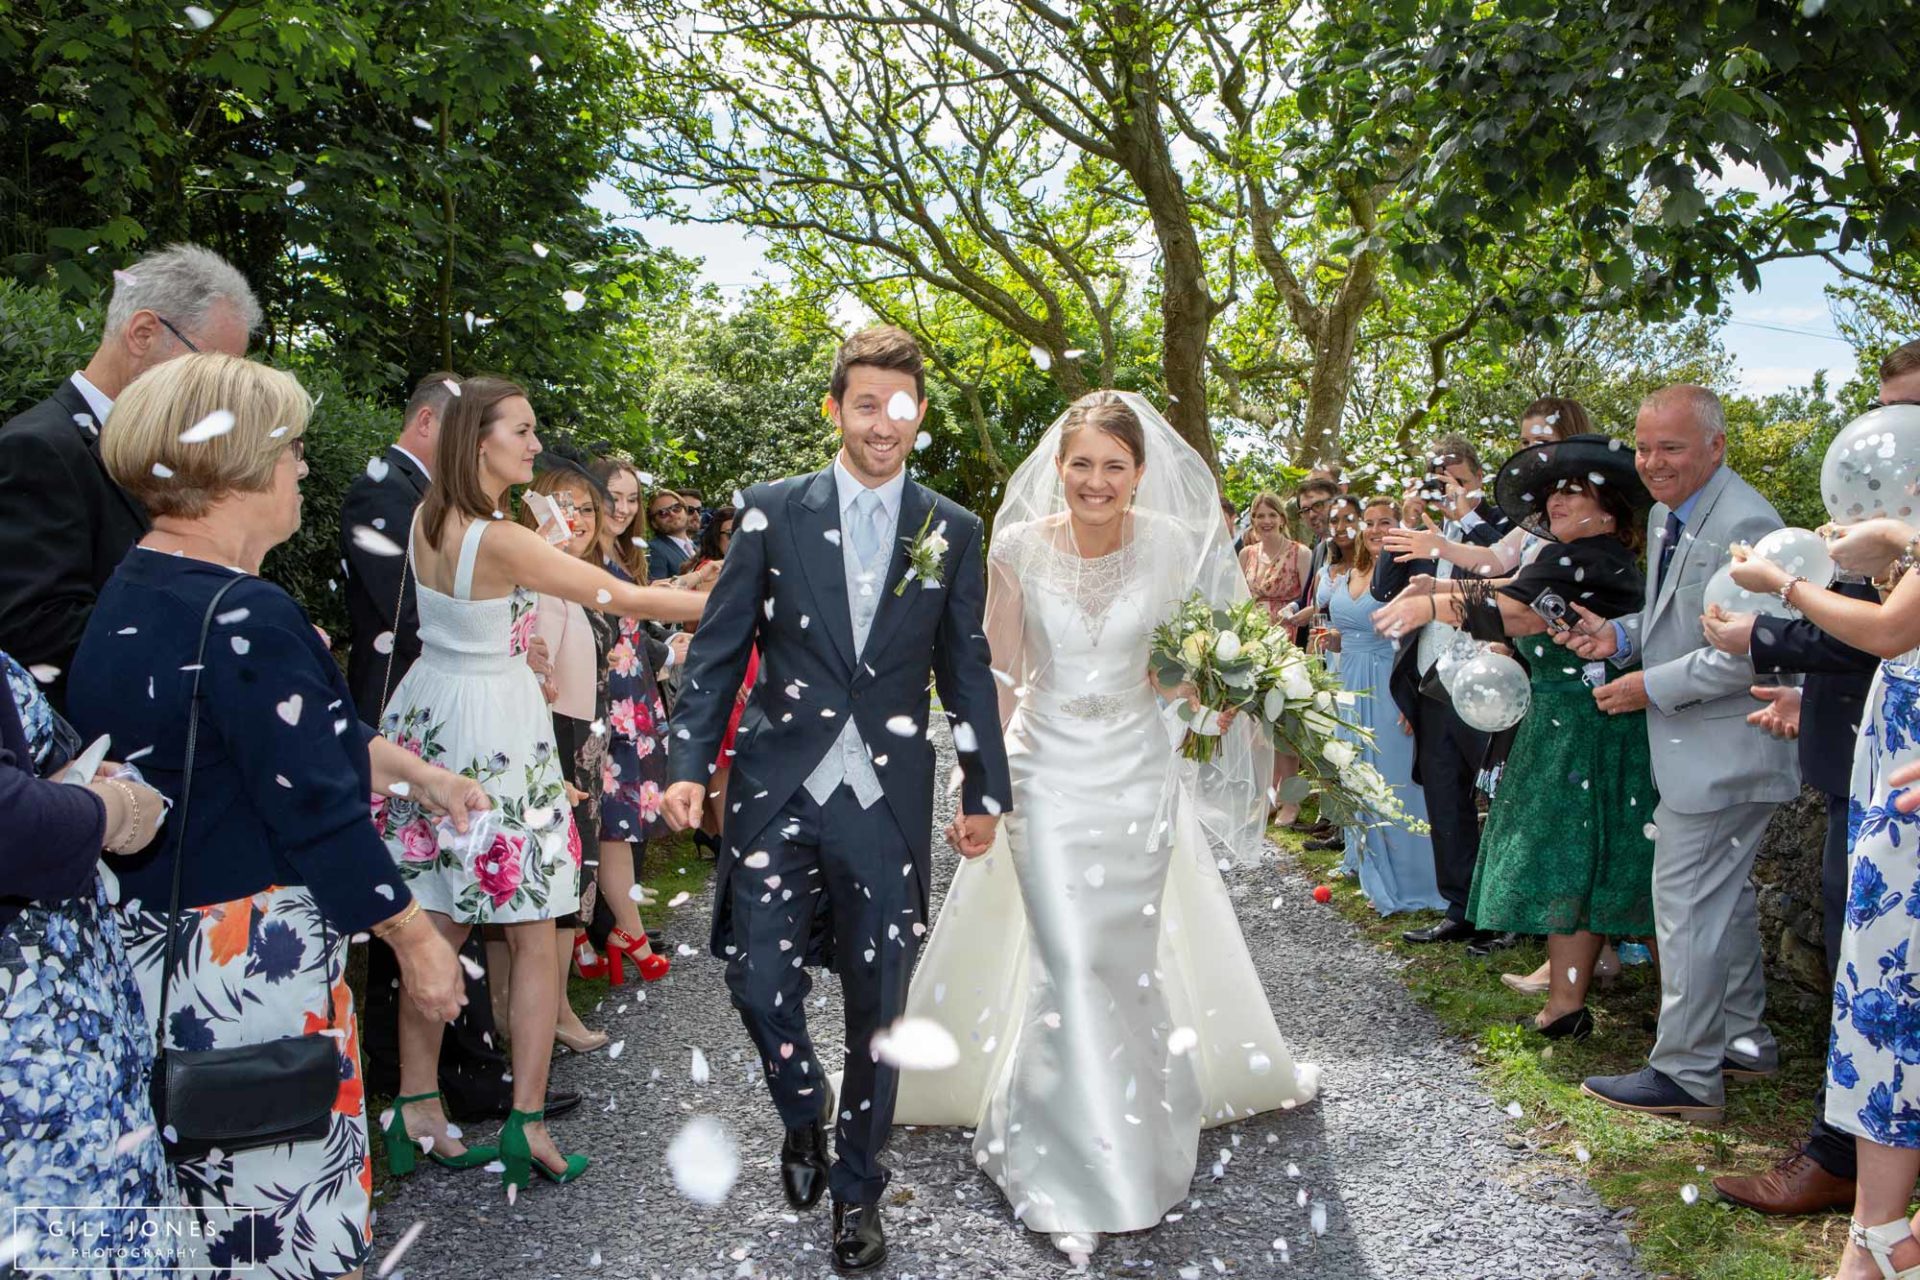 An Anglesey Wedding at Home